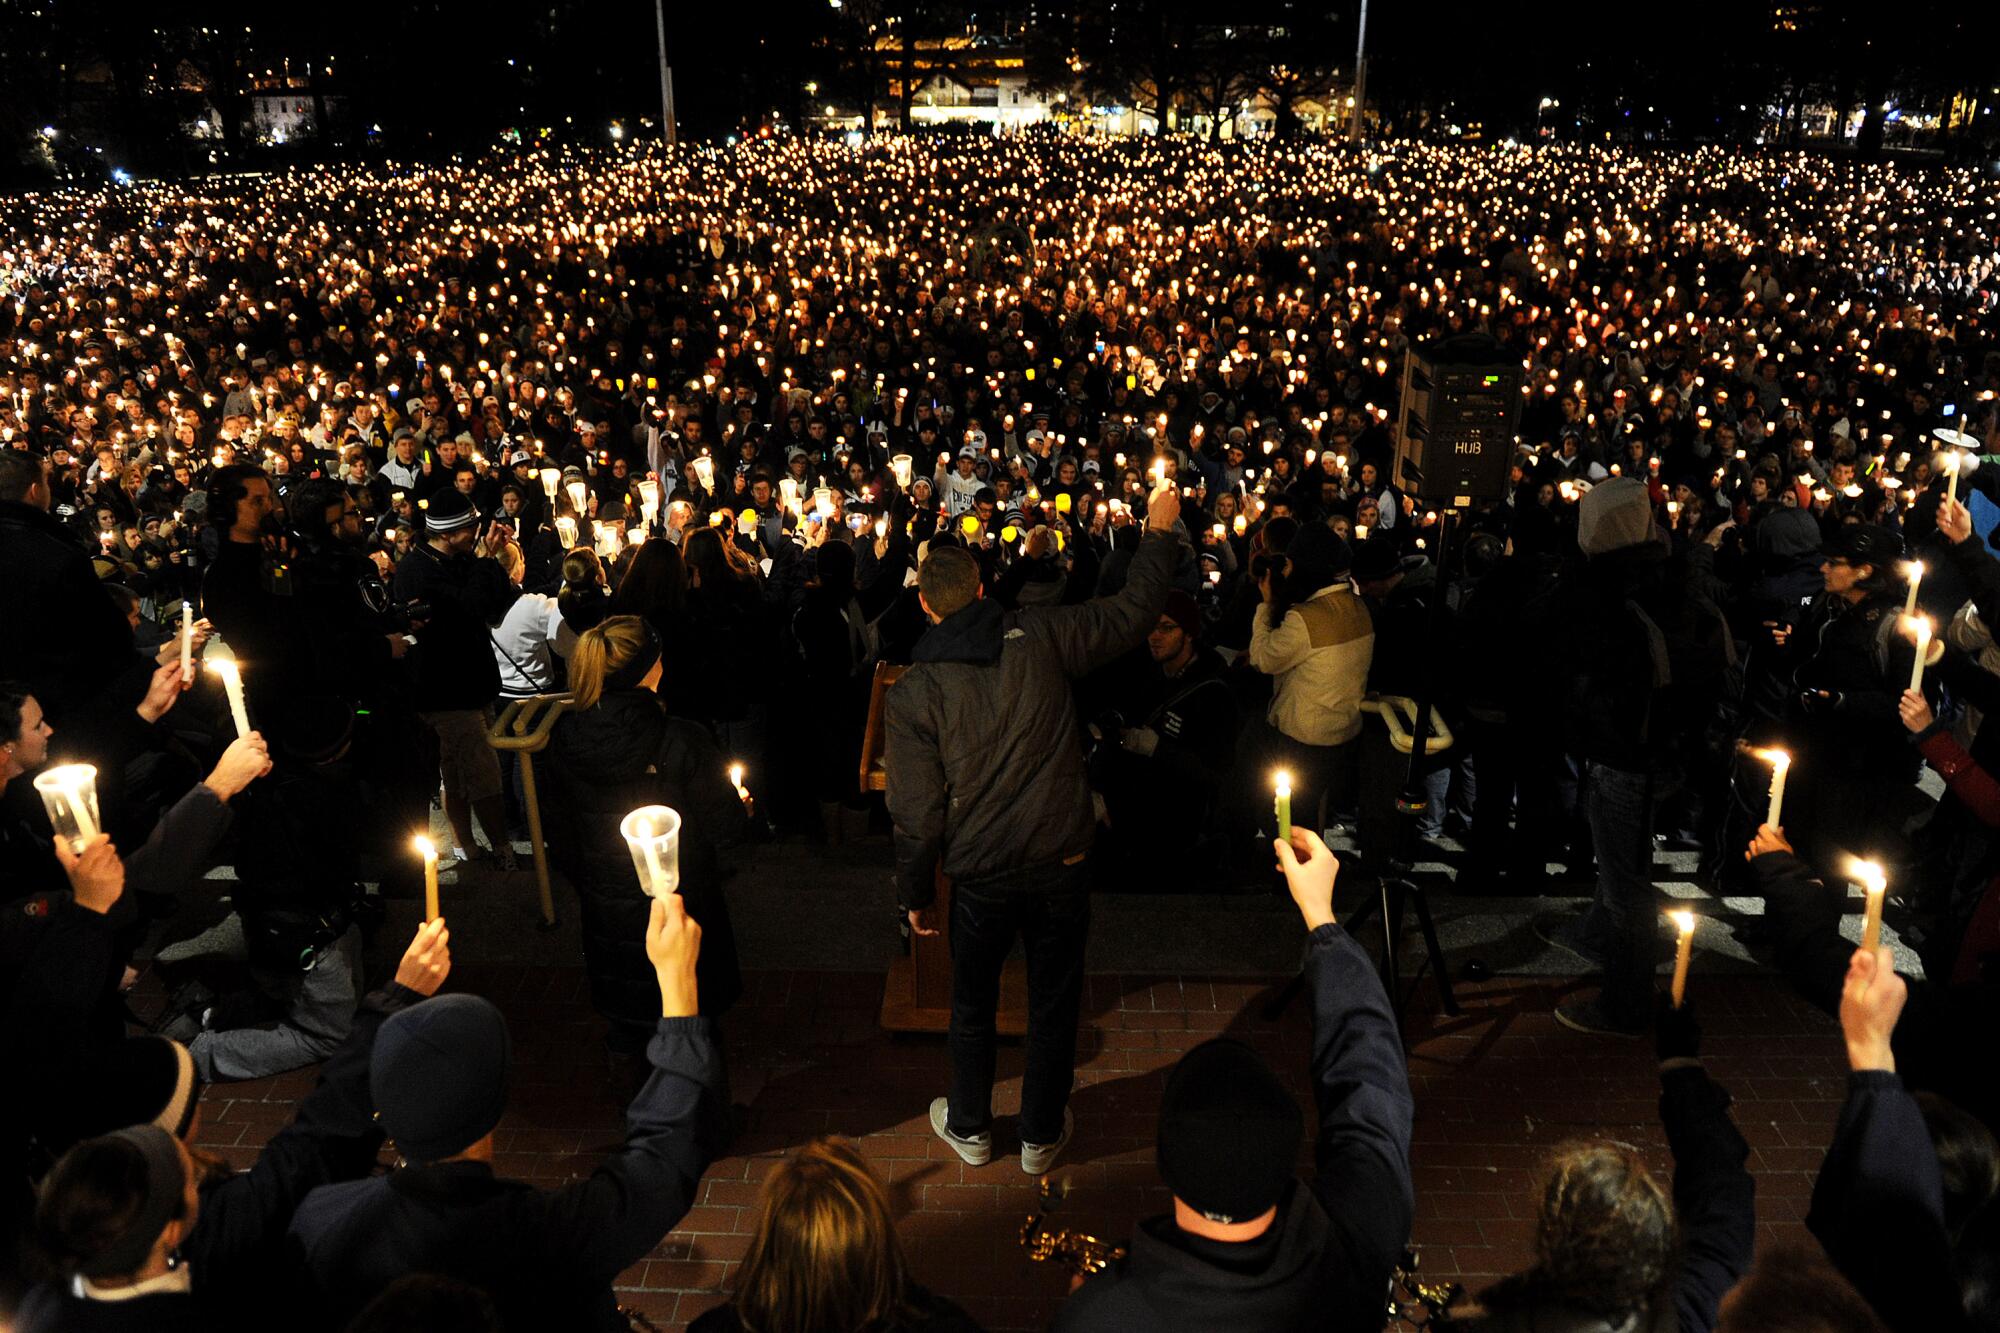 Penn State students hold a candlelight vigil for victims in the Jerry Sandusky sexual abuse scandal.